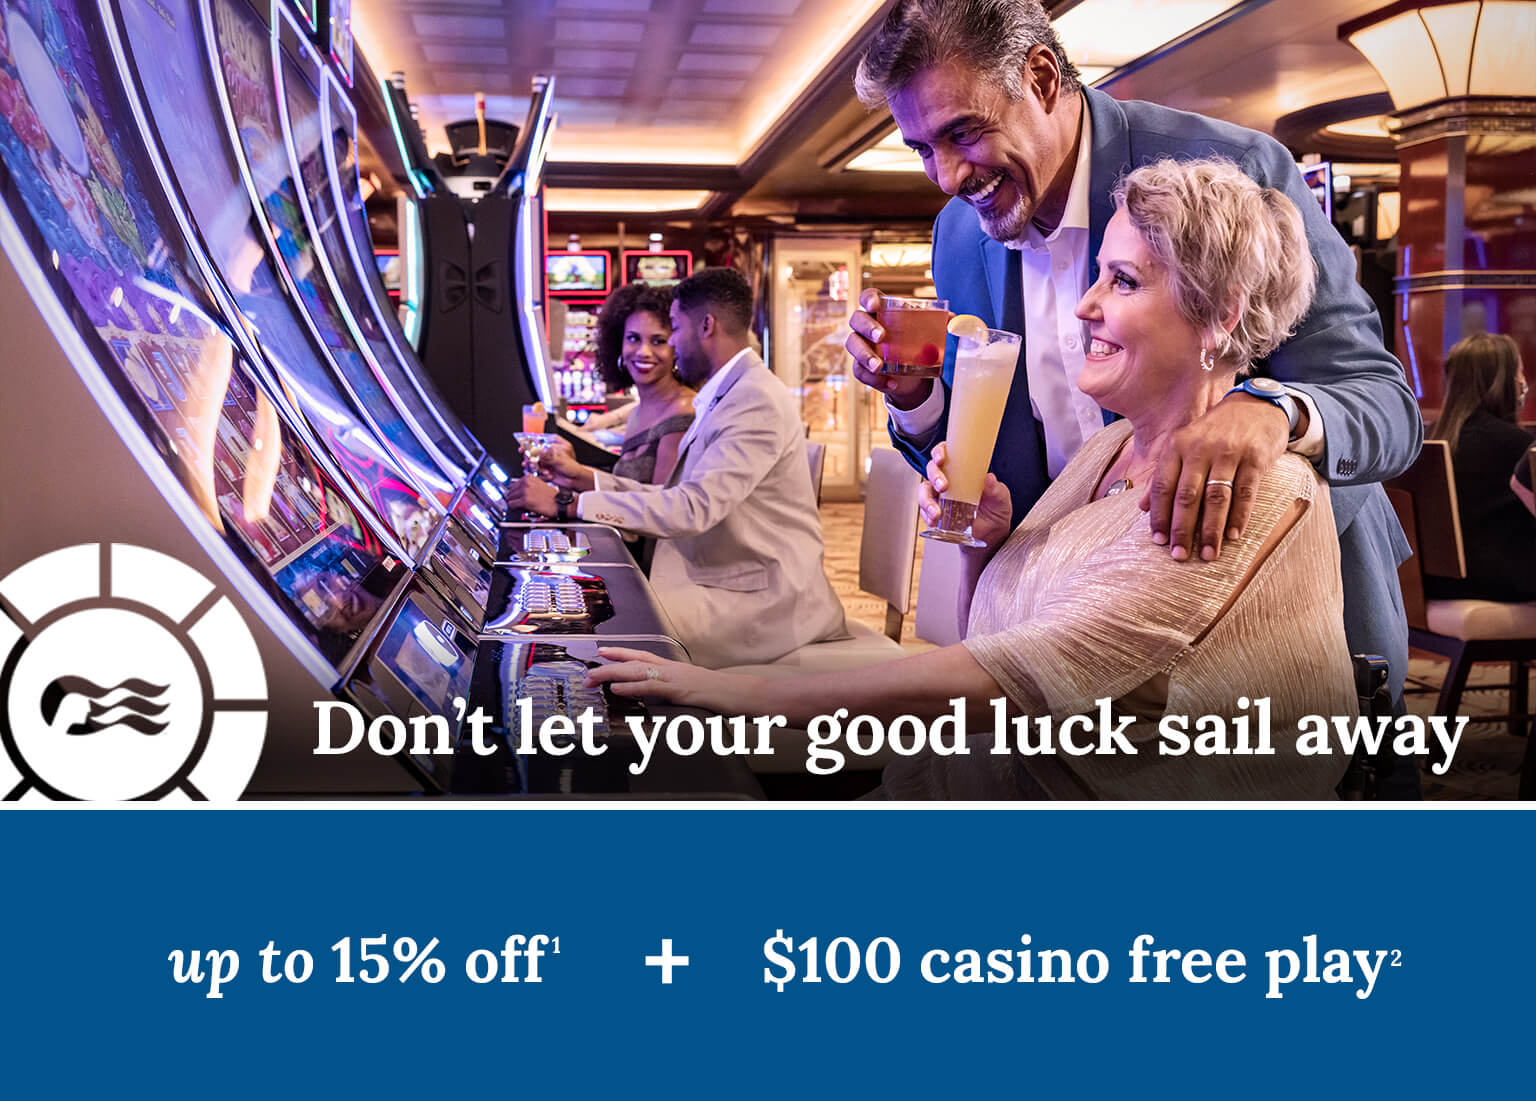 Up to 15% off + $100 casino free play. Click here to book.